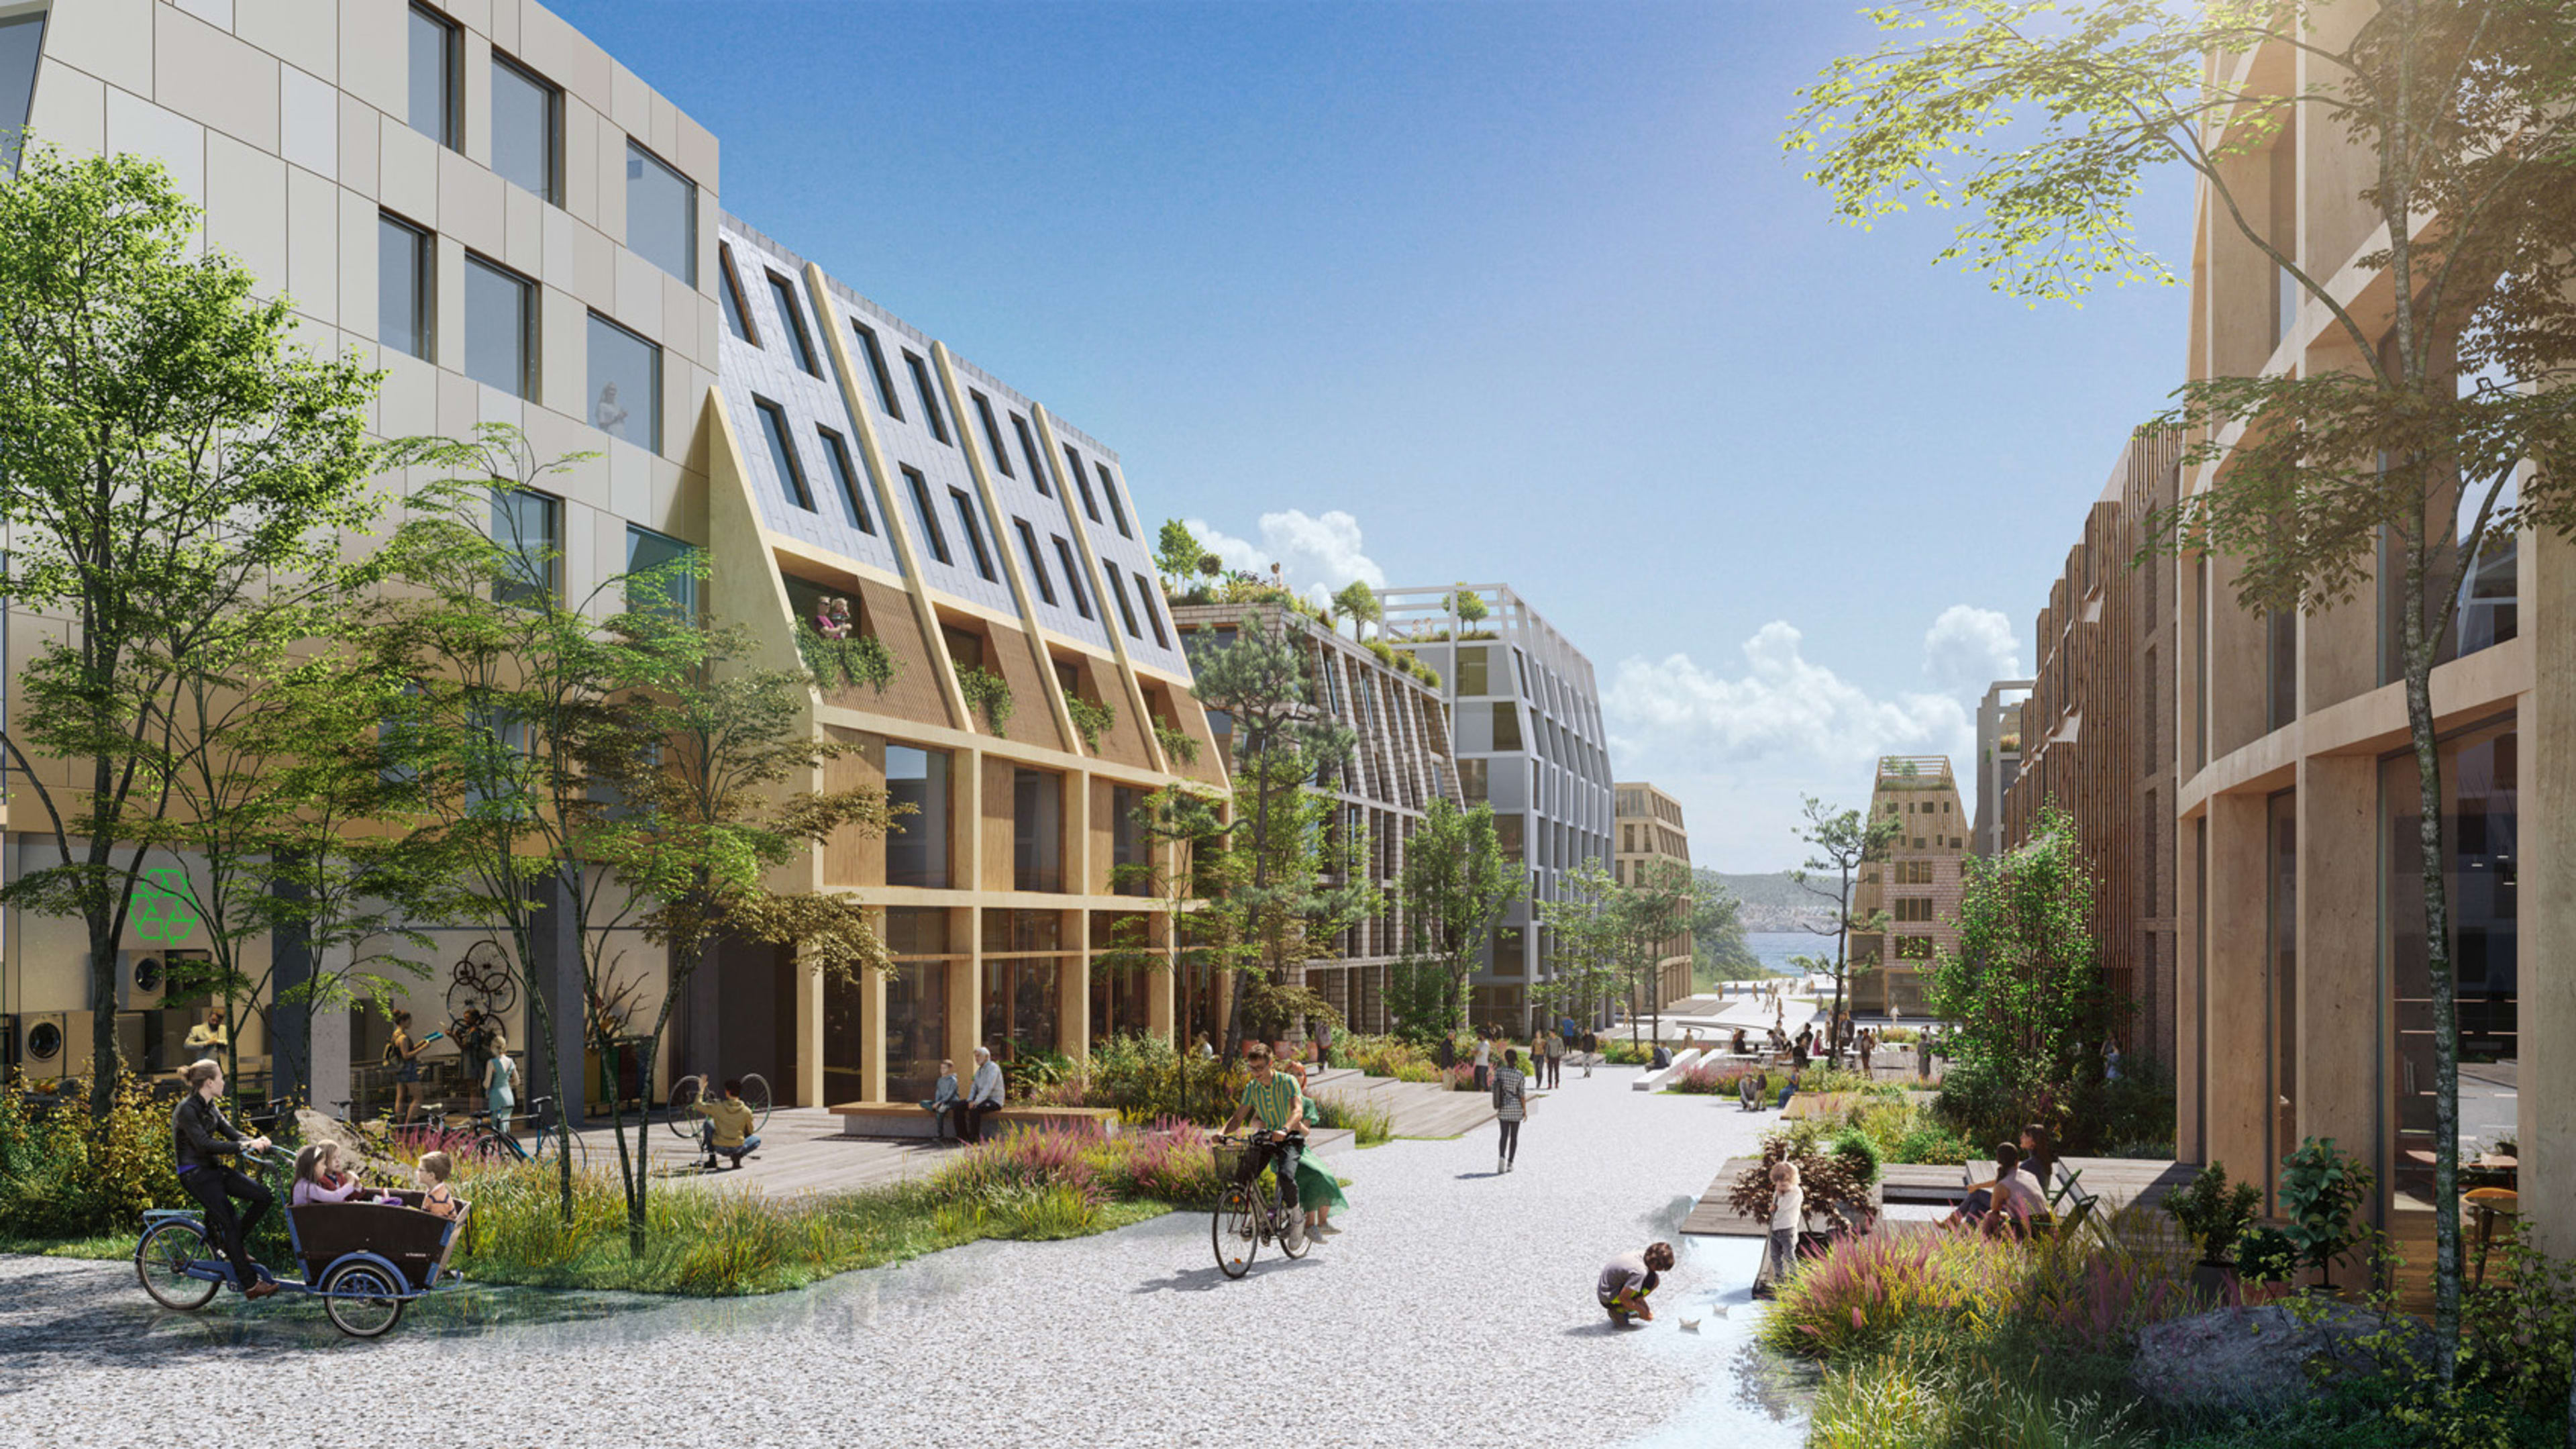 How to redesign a neighborhood for zero emissions